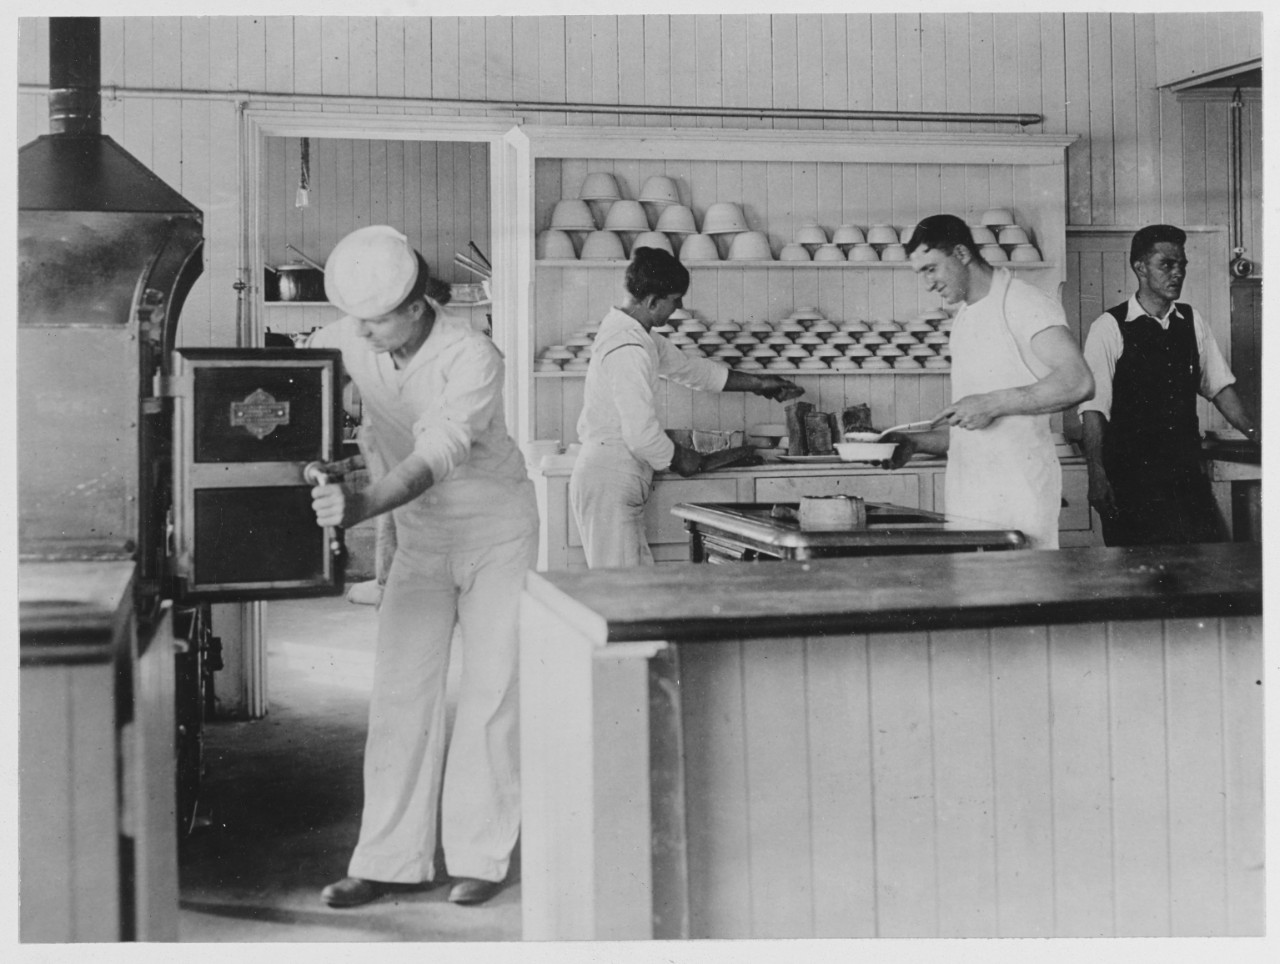 With the American Navy in wartime. U.S. Naval men's club cooks at work.